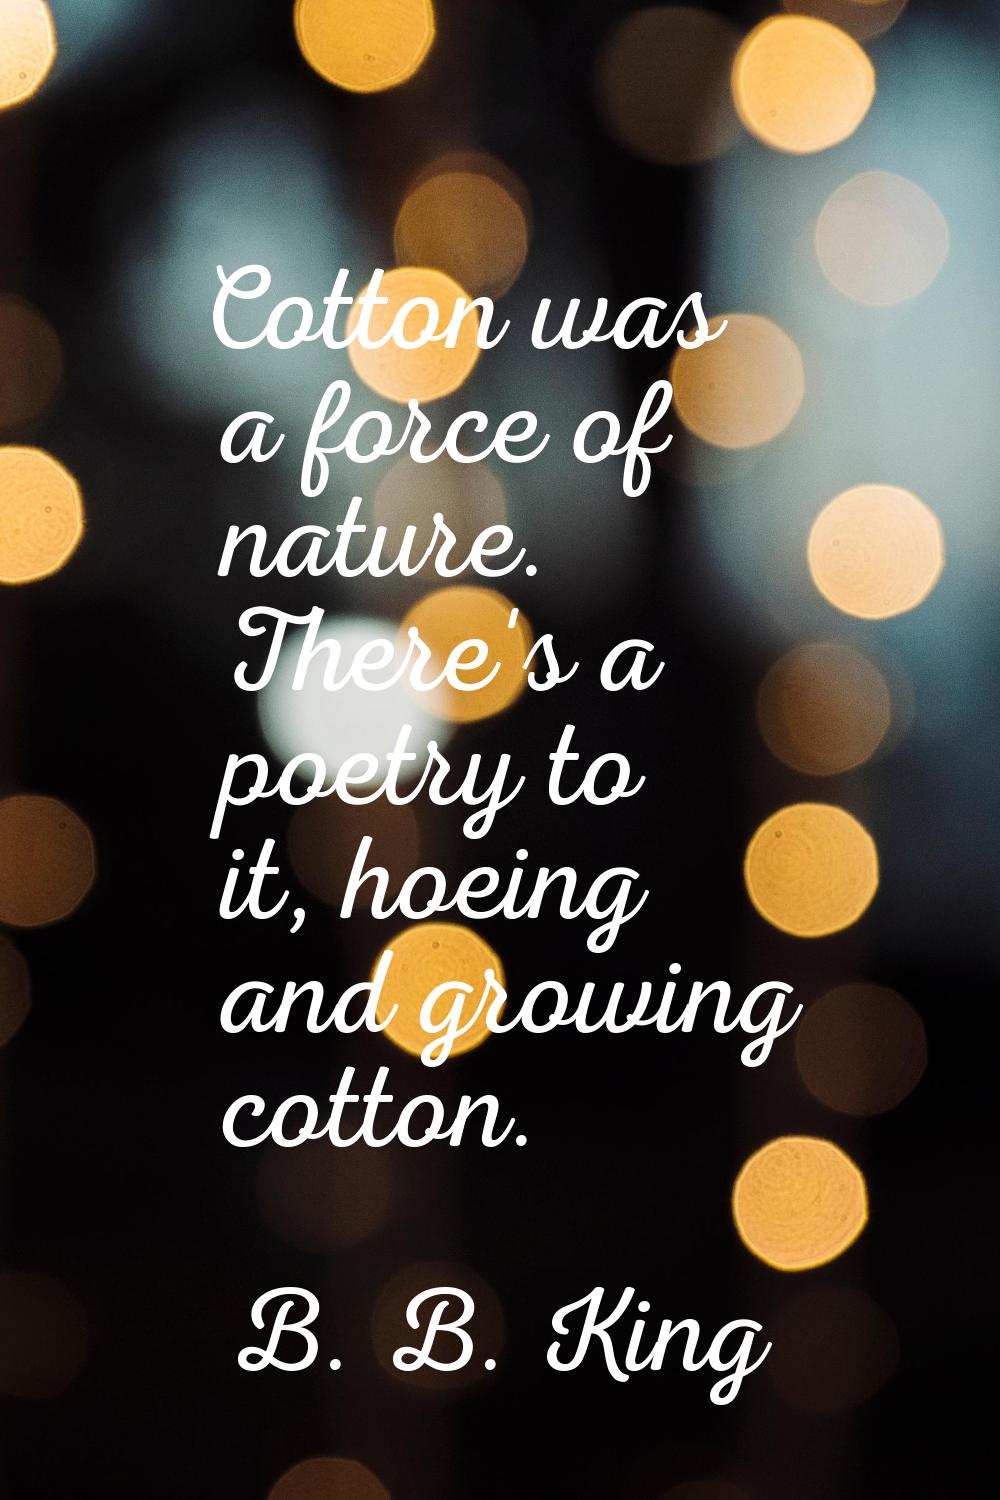 Cotton was a force of nature. There's a poetry to it, hoeing and growing cotton.